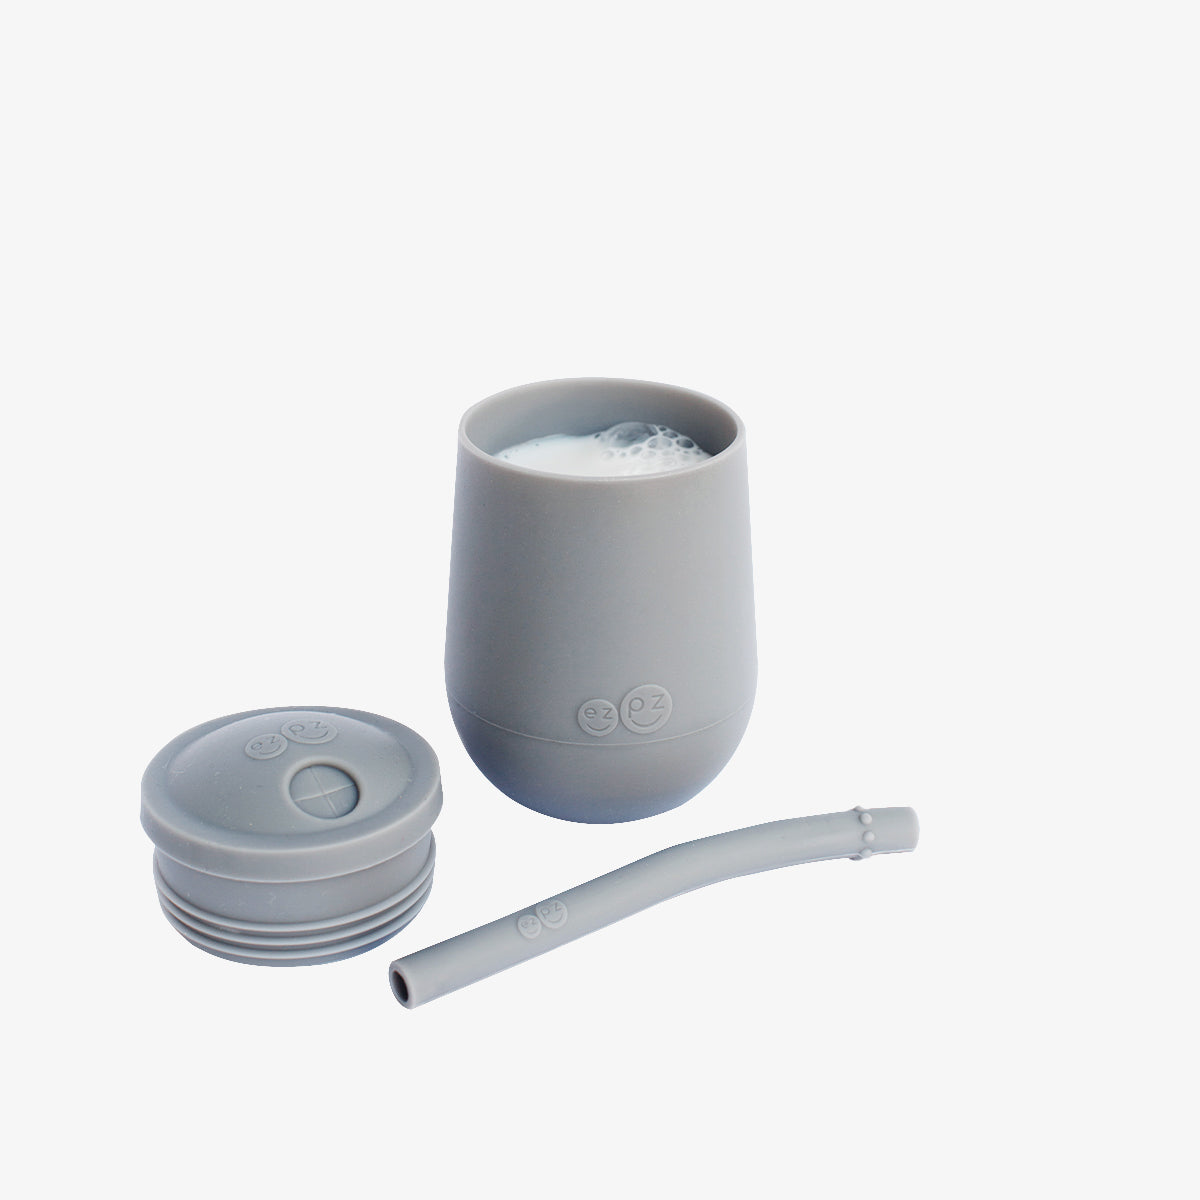 The Mini Cup + Straw in Gray by ezpz / Silicone Drinking Cup and Straw Training System for Toddlers